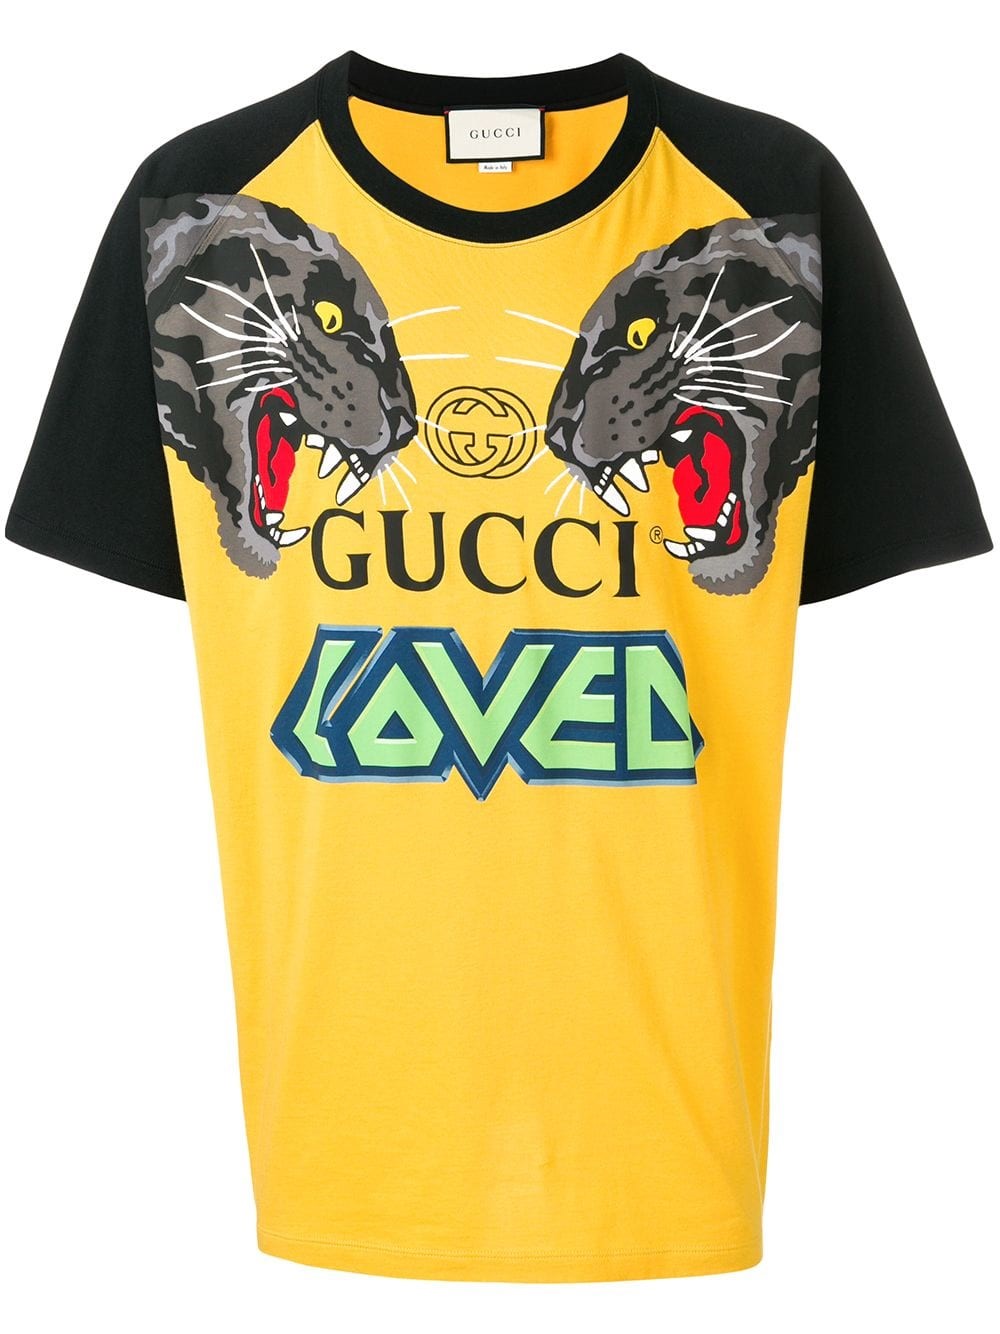 gucci LOVED T-SHIRT available on 